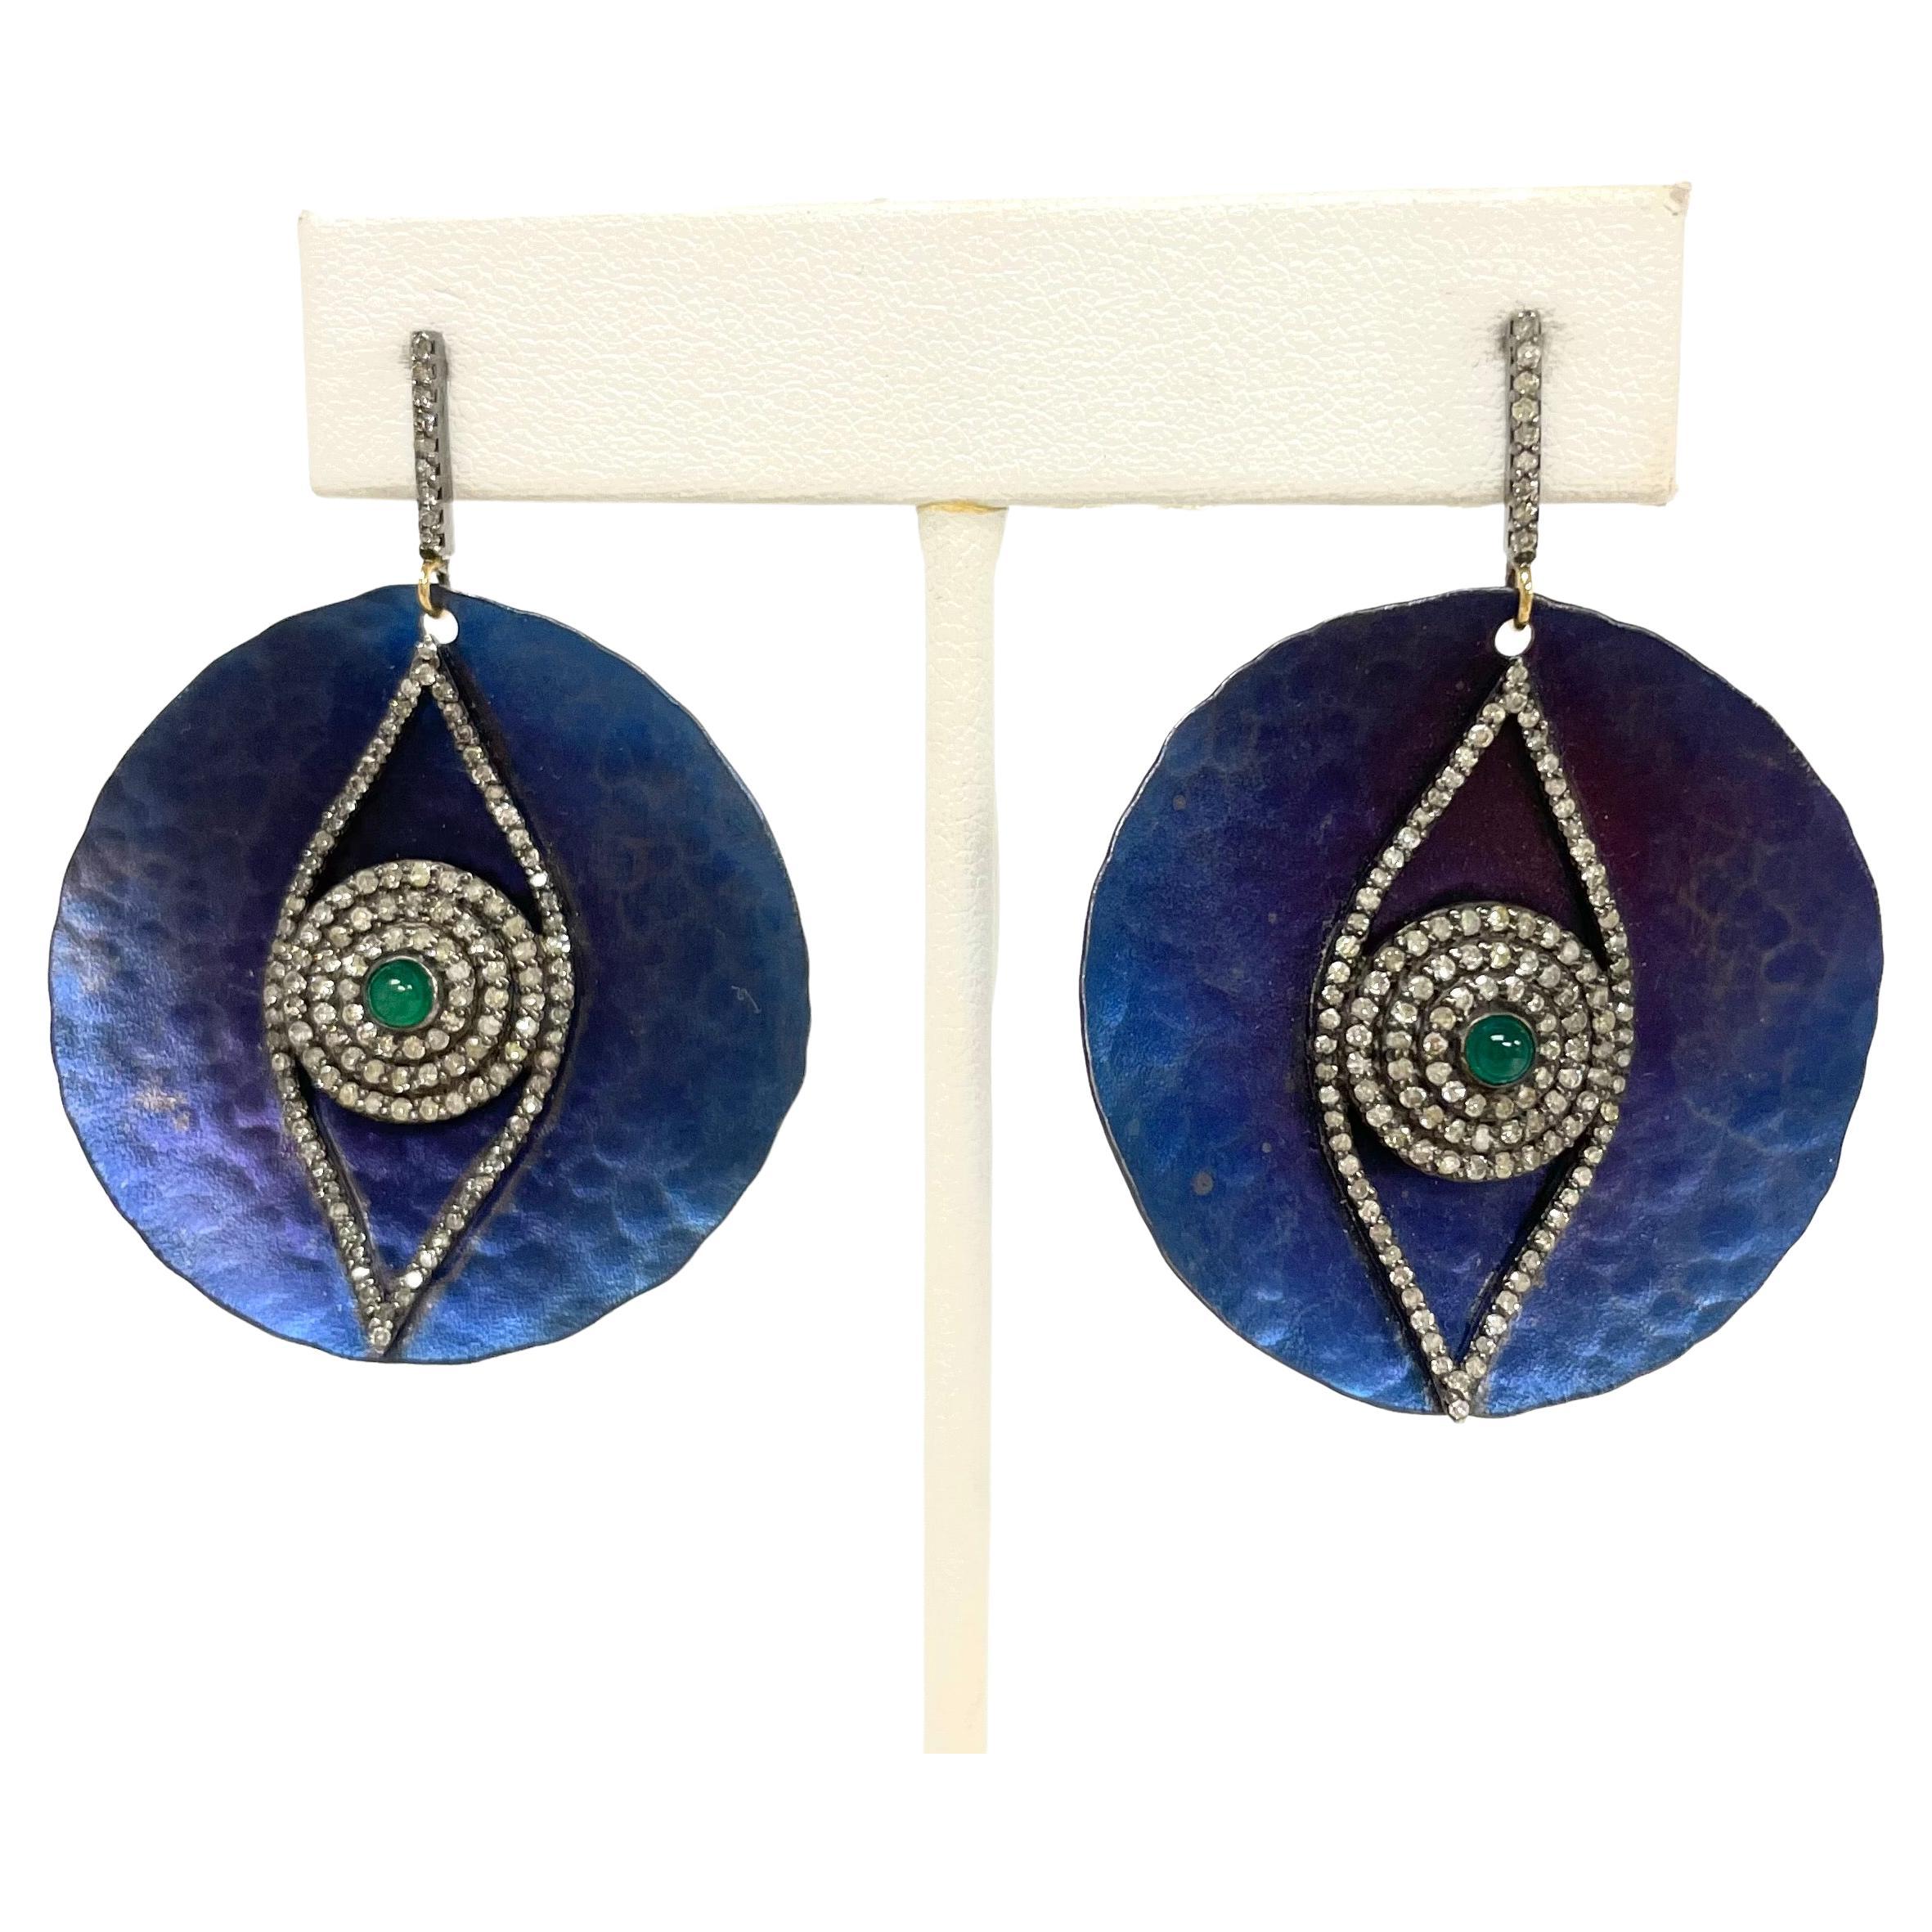  Cobalt Blue Titanium with Emeralds and Diamonds Earrings  In New Condition For Sale In Laguna Beach, CA